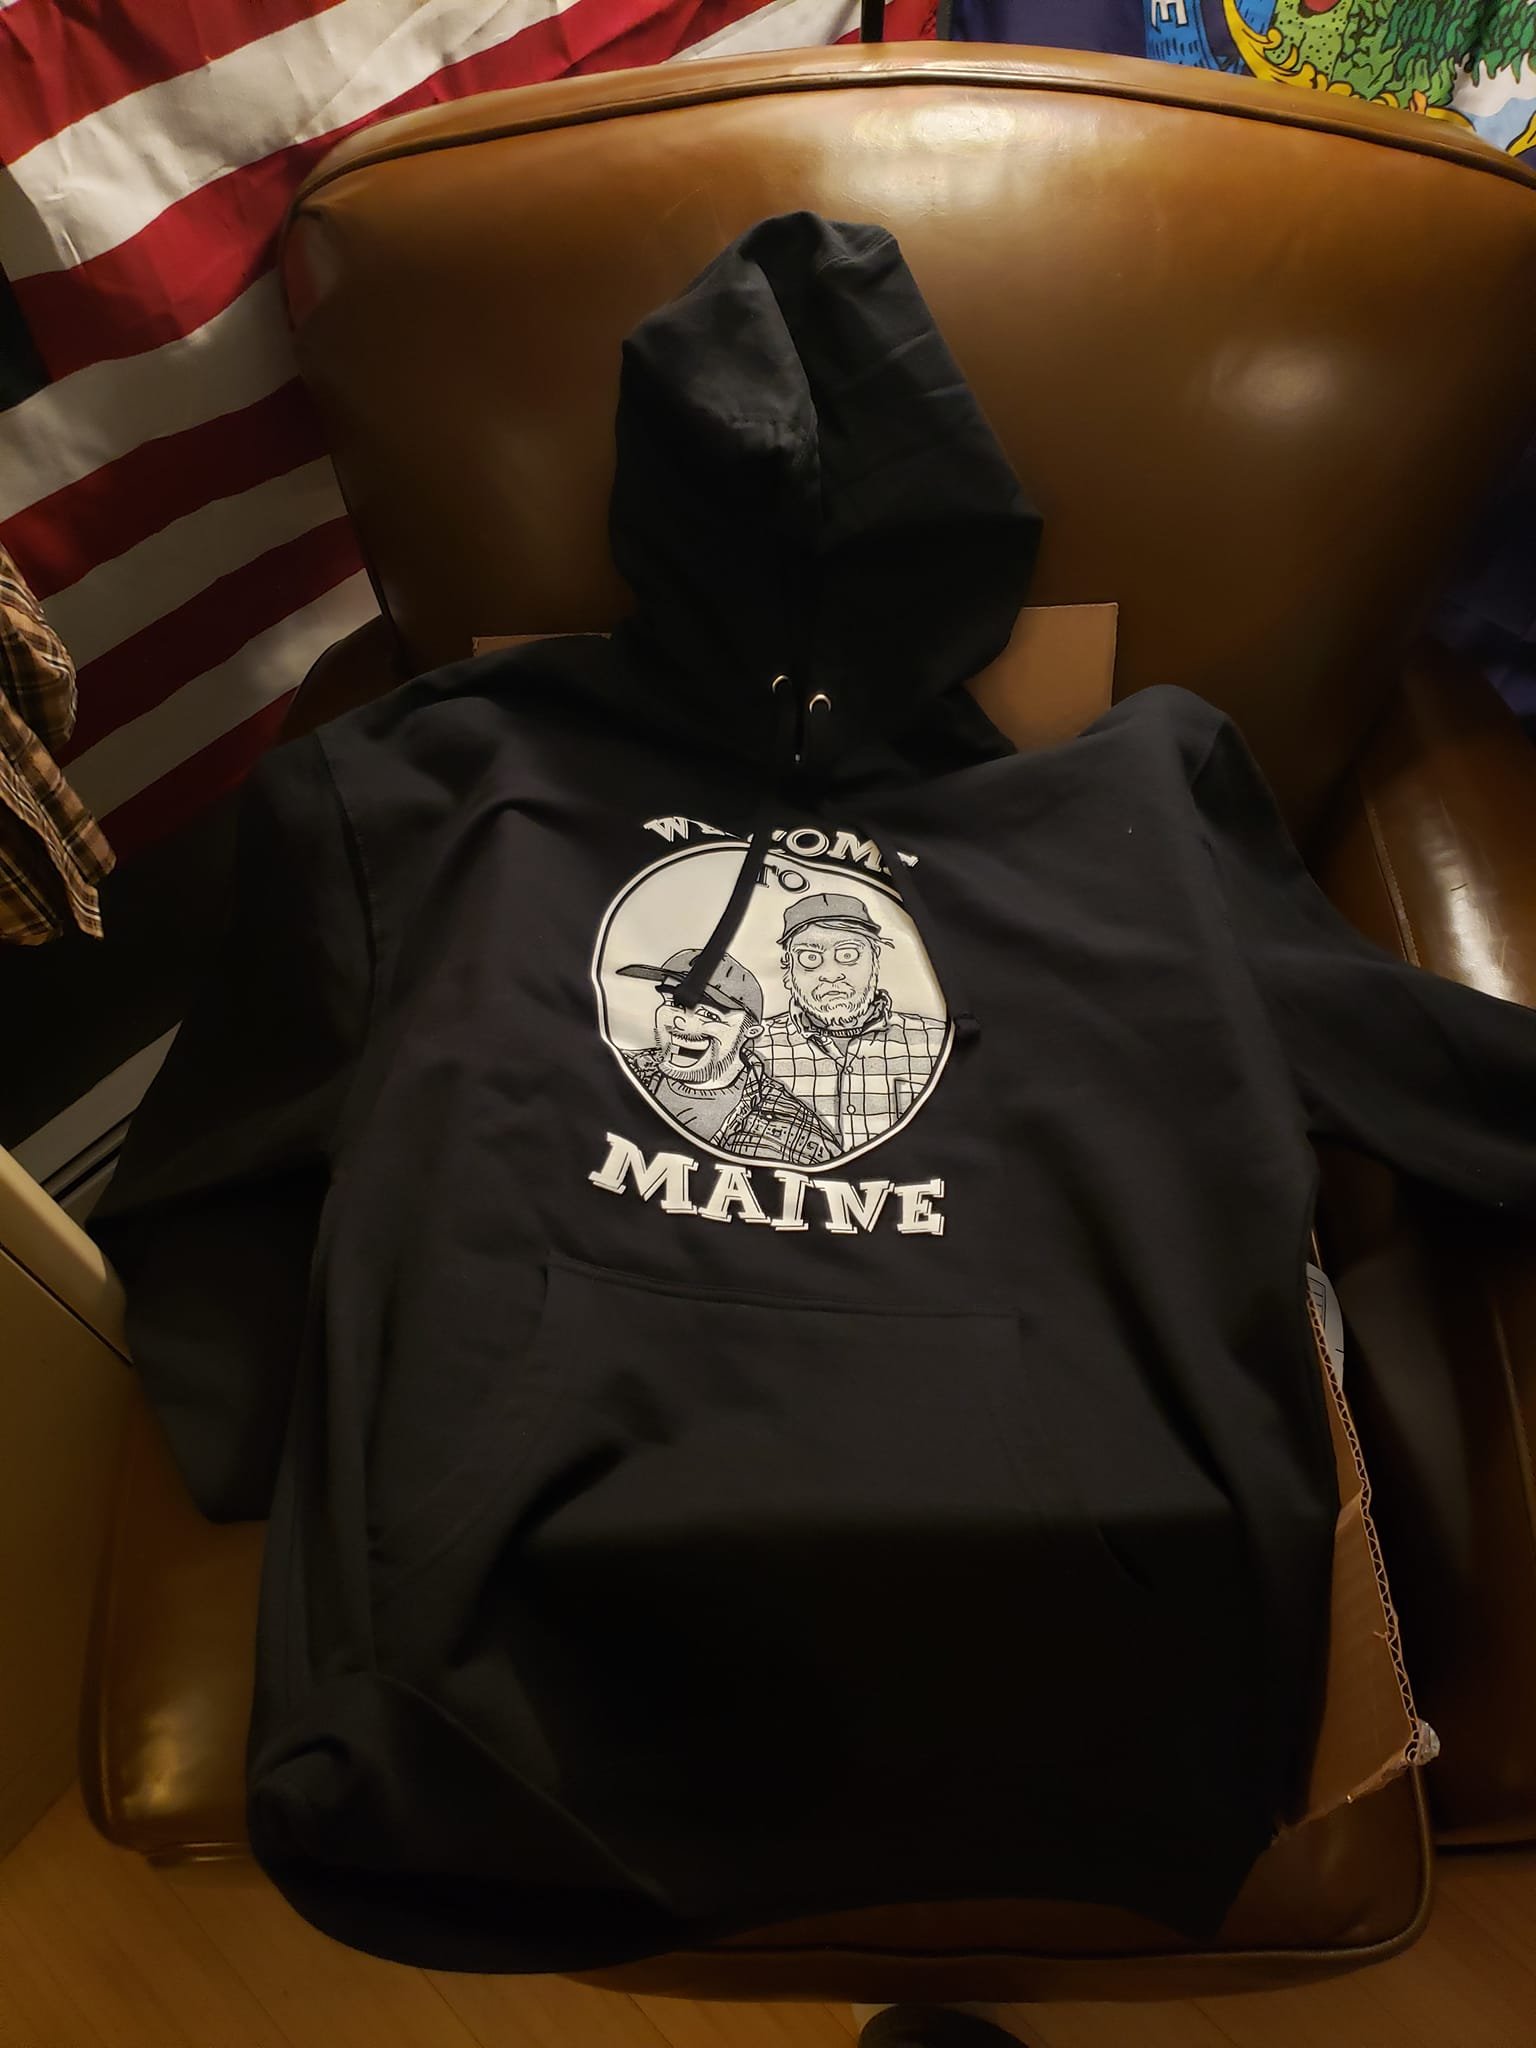 W2M OG Logo Hoodie — Welcome to Maine. Oh yuht.